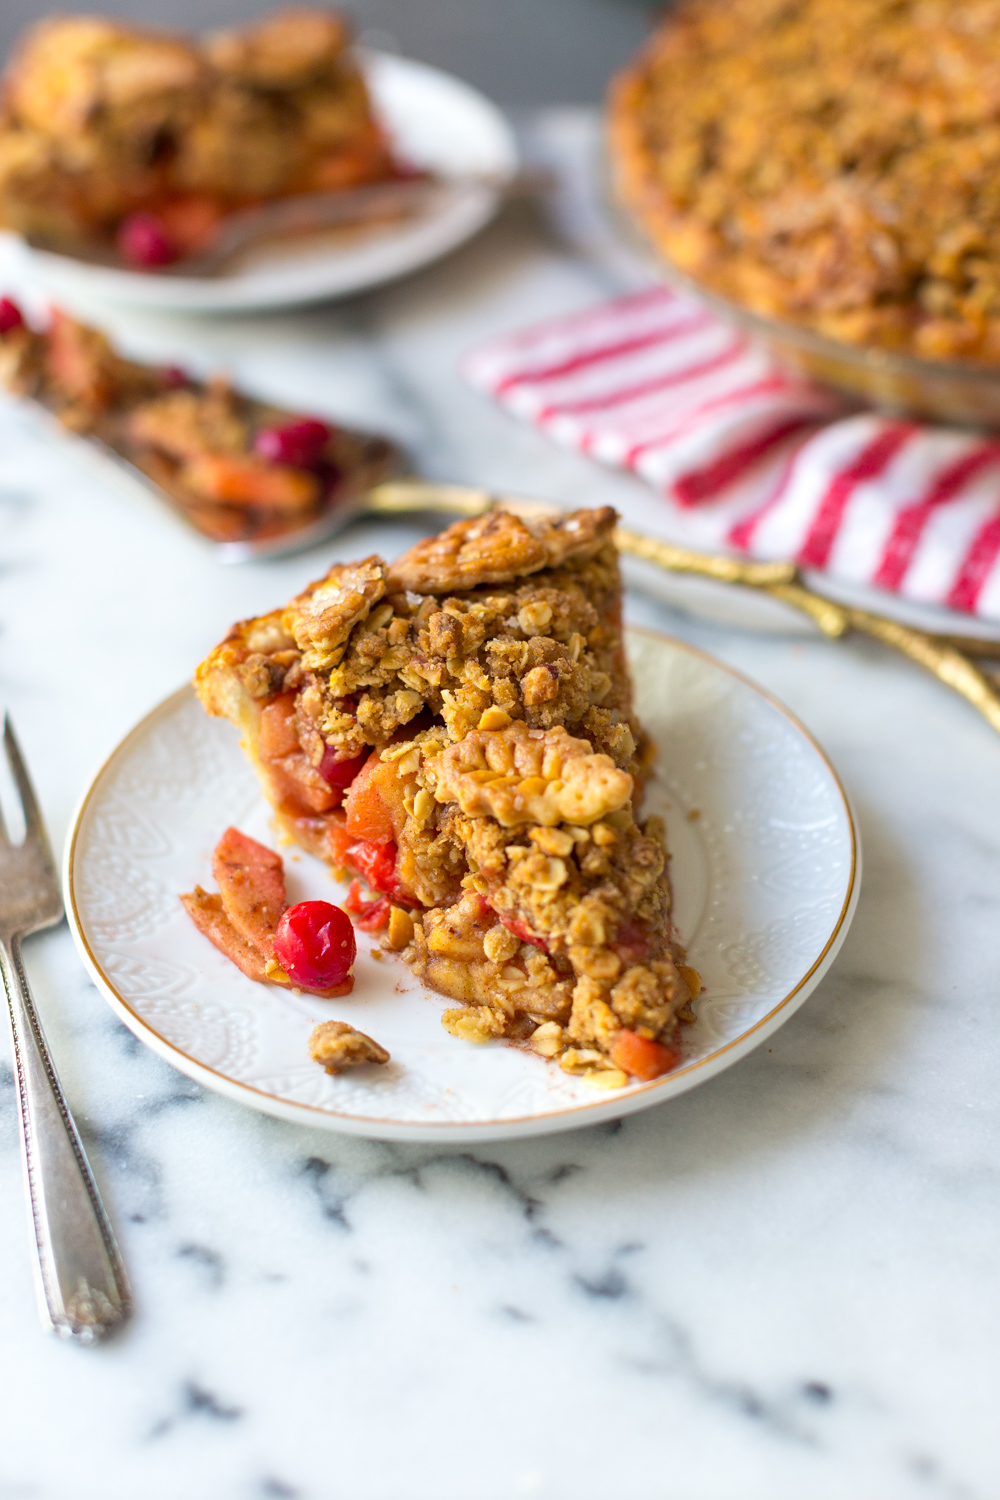 A thick slice of Cranberry Apple Brown Butter Crumble Pie.